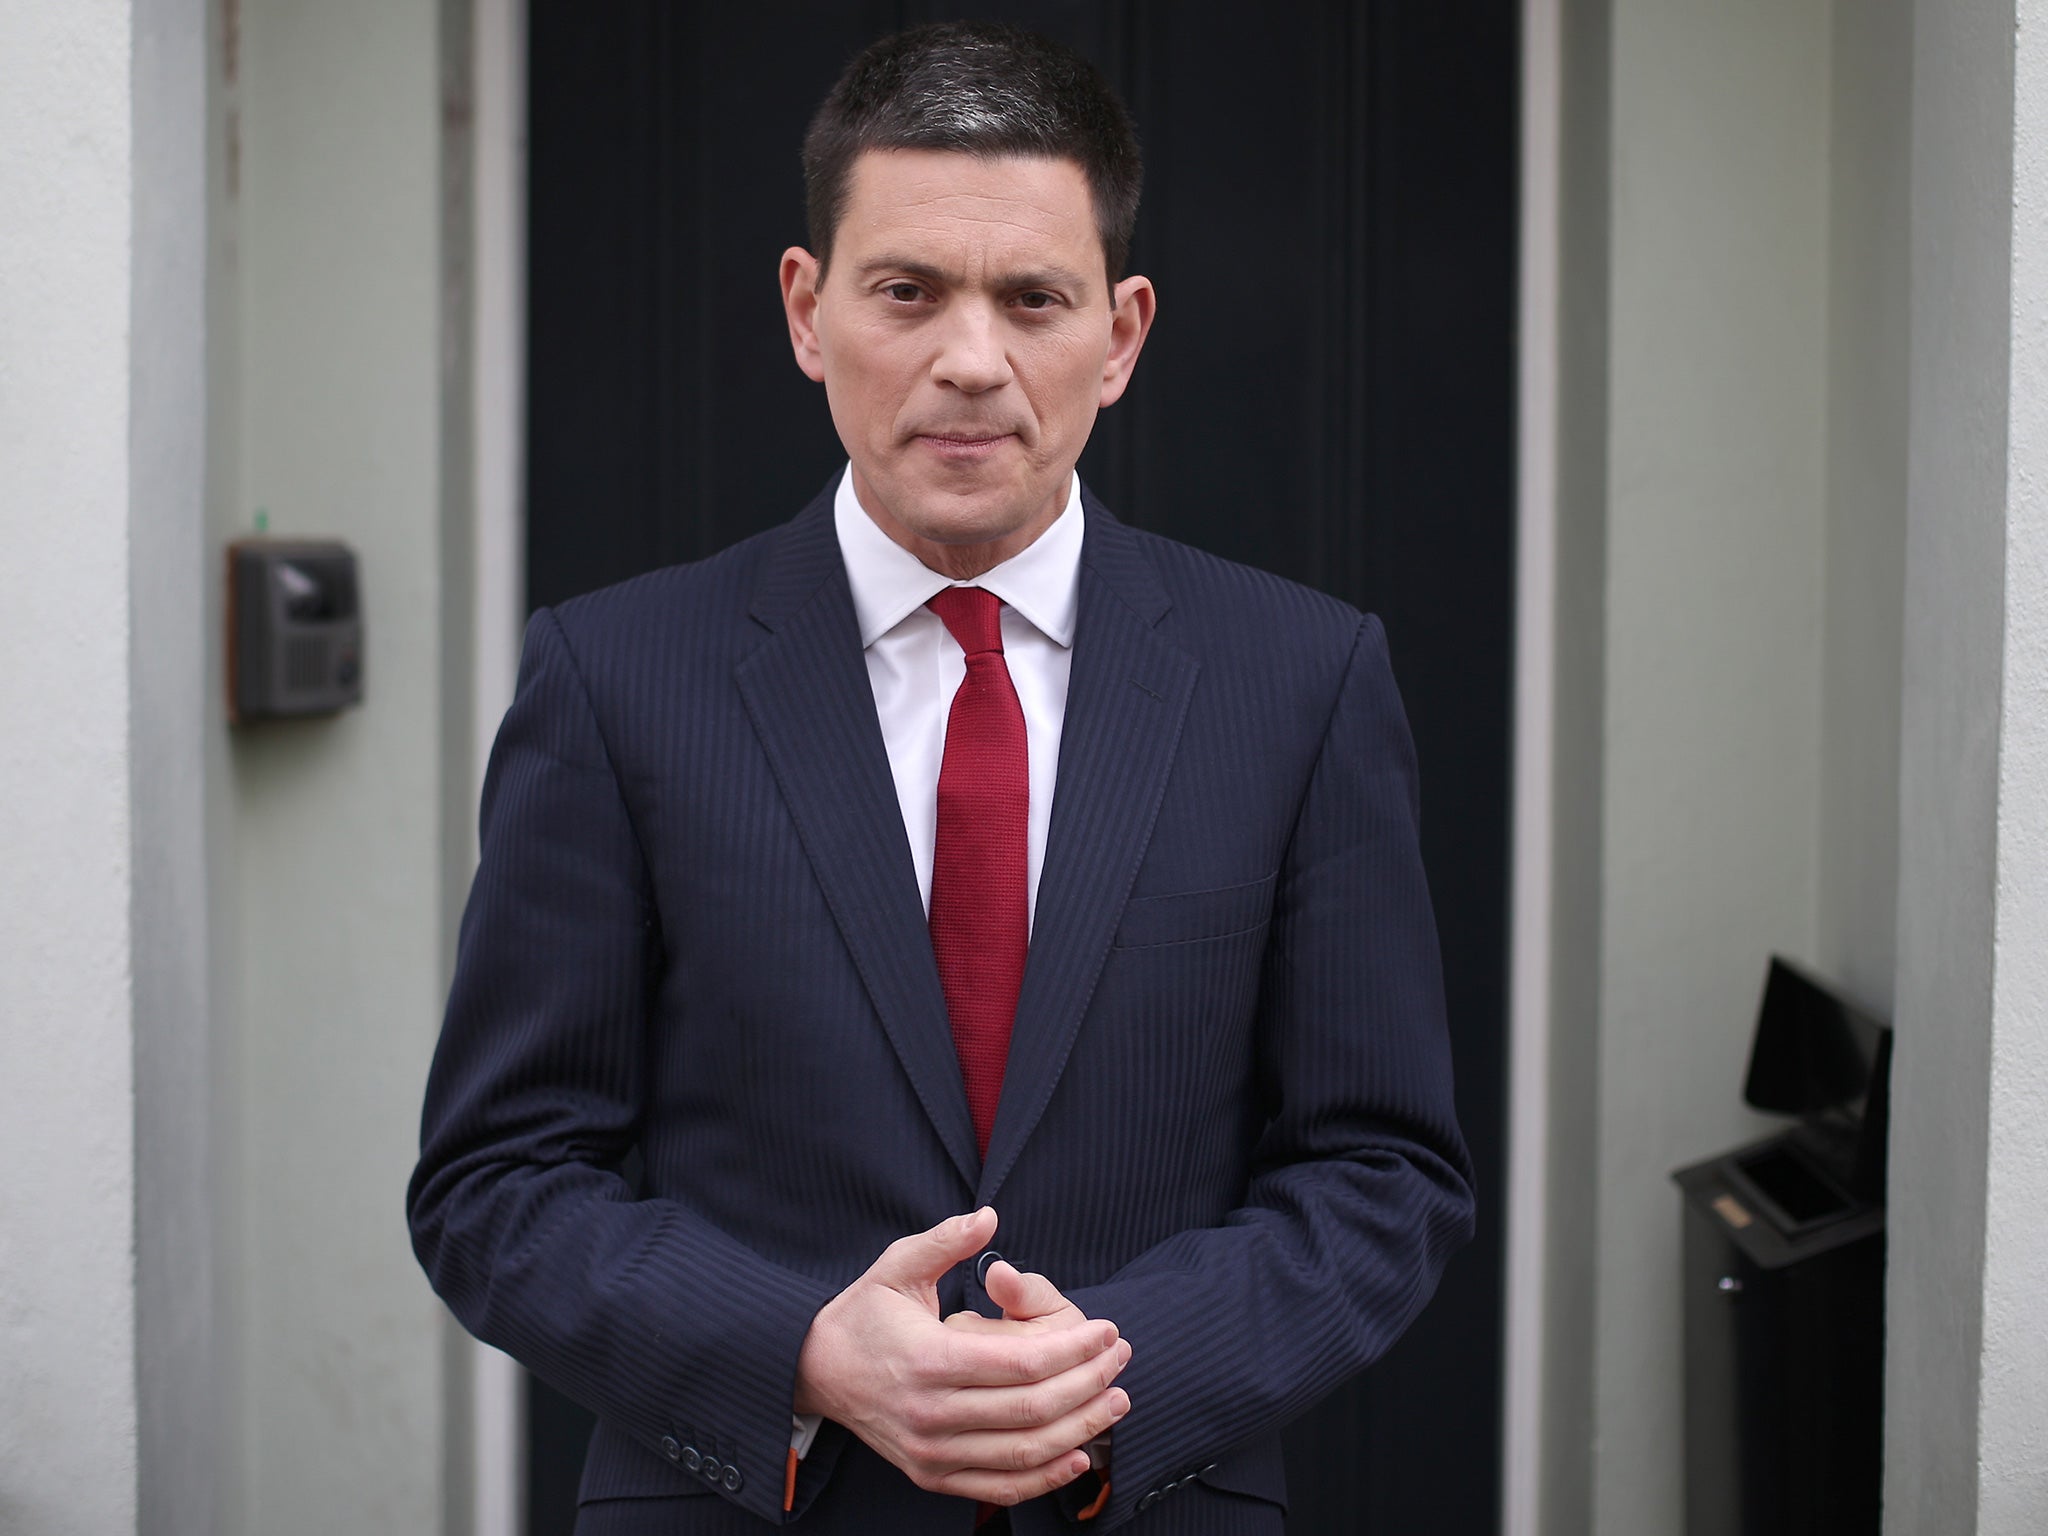 David Miliband has issued a call for politicians on all sides to fight back against the ‘worst consequences’ of last year’s vote to leave the EU